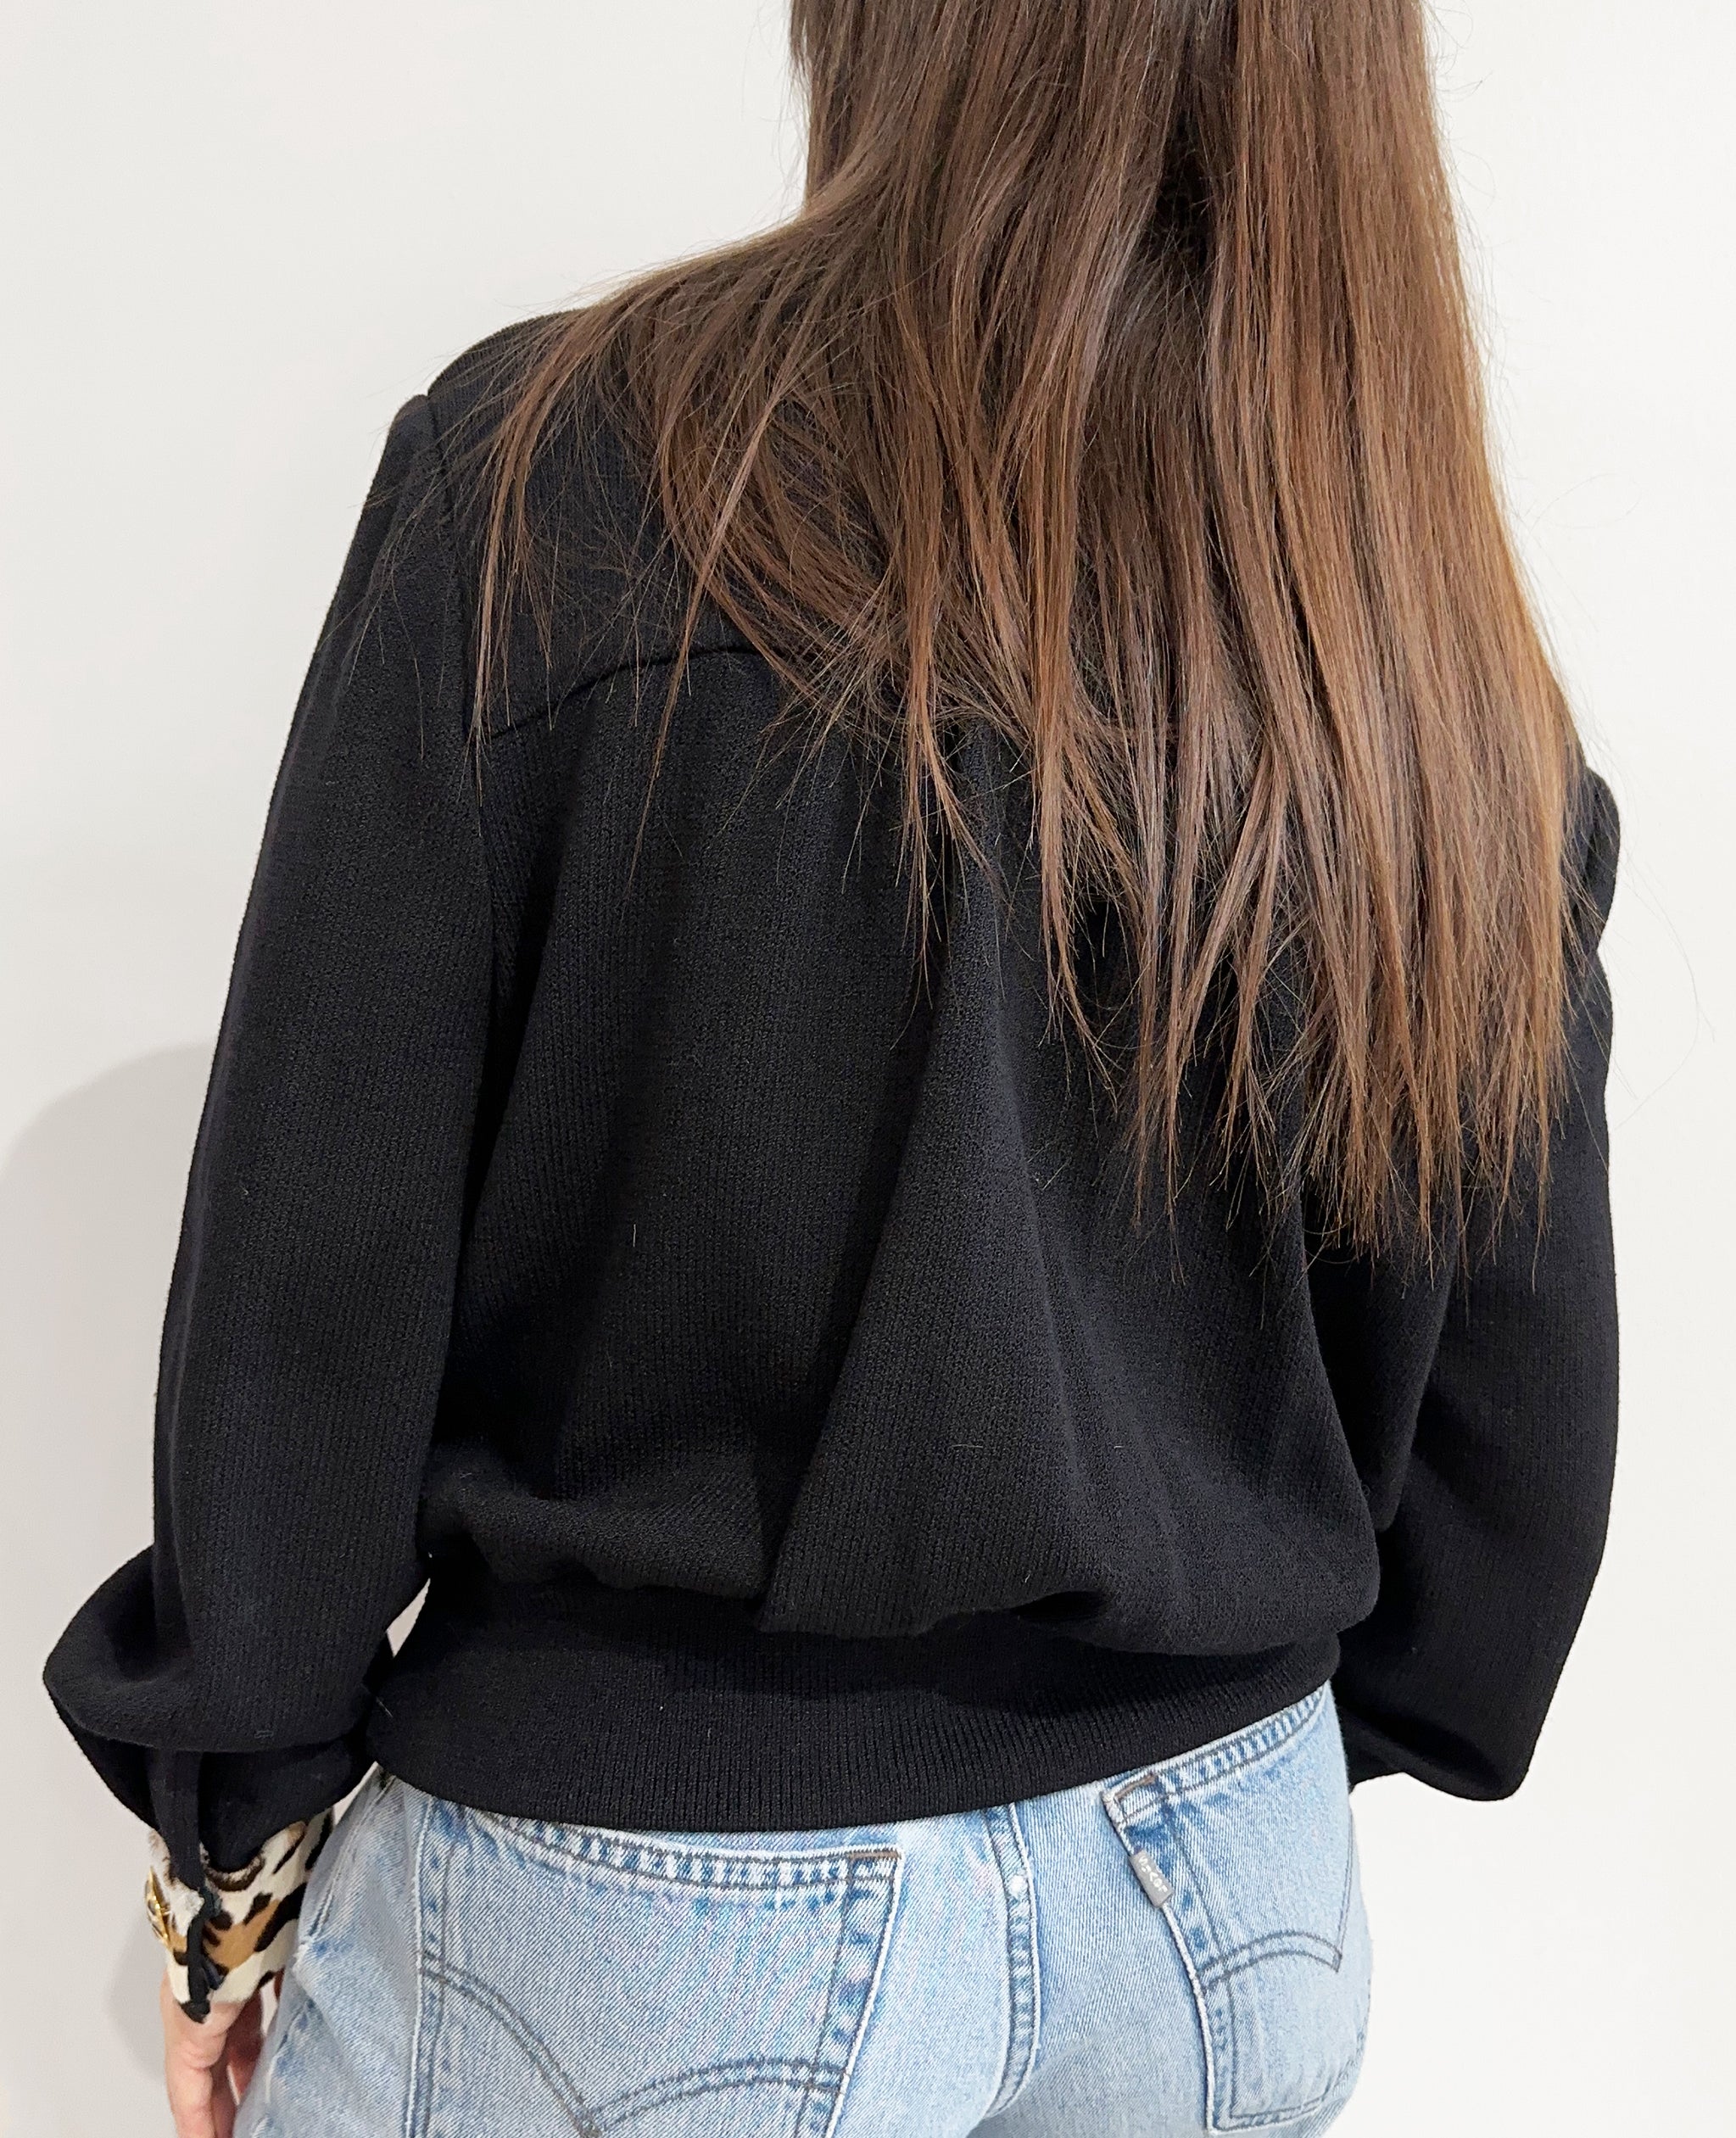 Black Sweater With Cowhide Detail